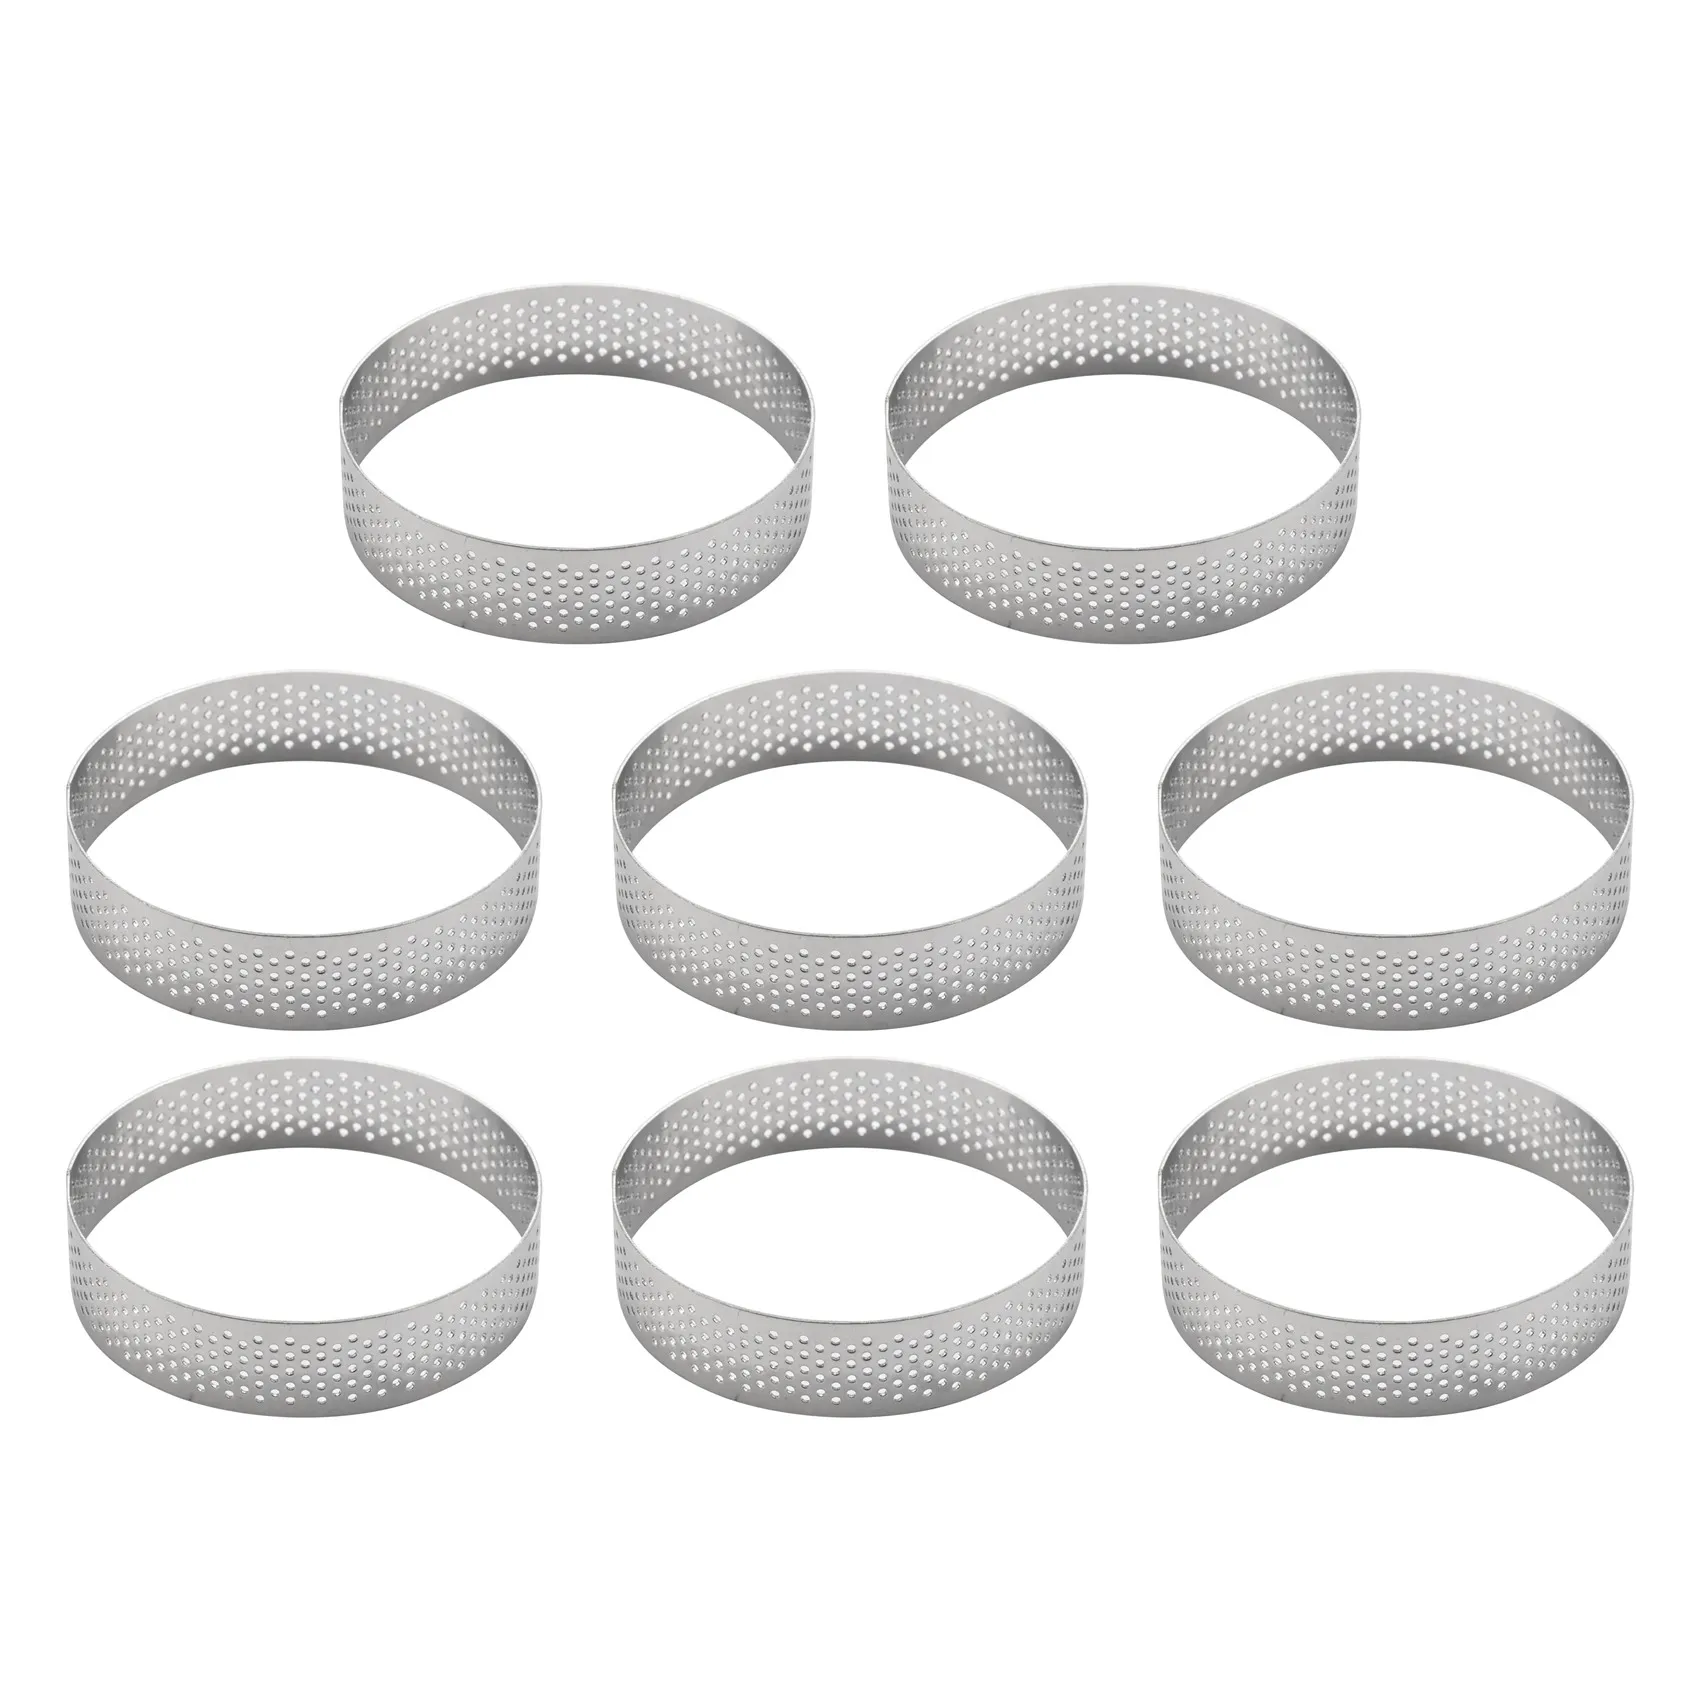 

8Pcs Stainless Steel Tart Ring, Heat-Resistant Perforated Cake Mousse Ring Round Double Rolled Tart Ring Metal Mold 8cm